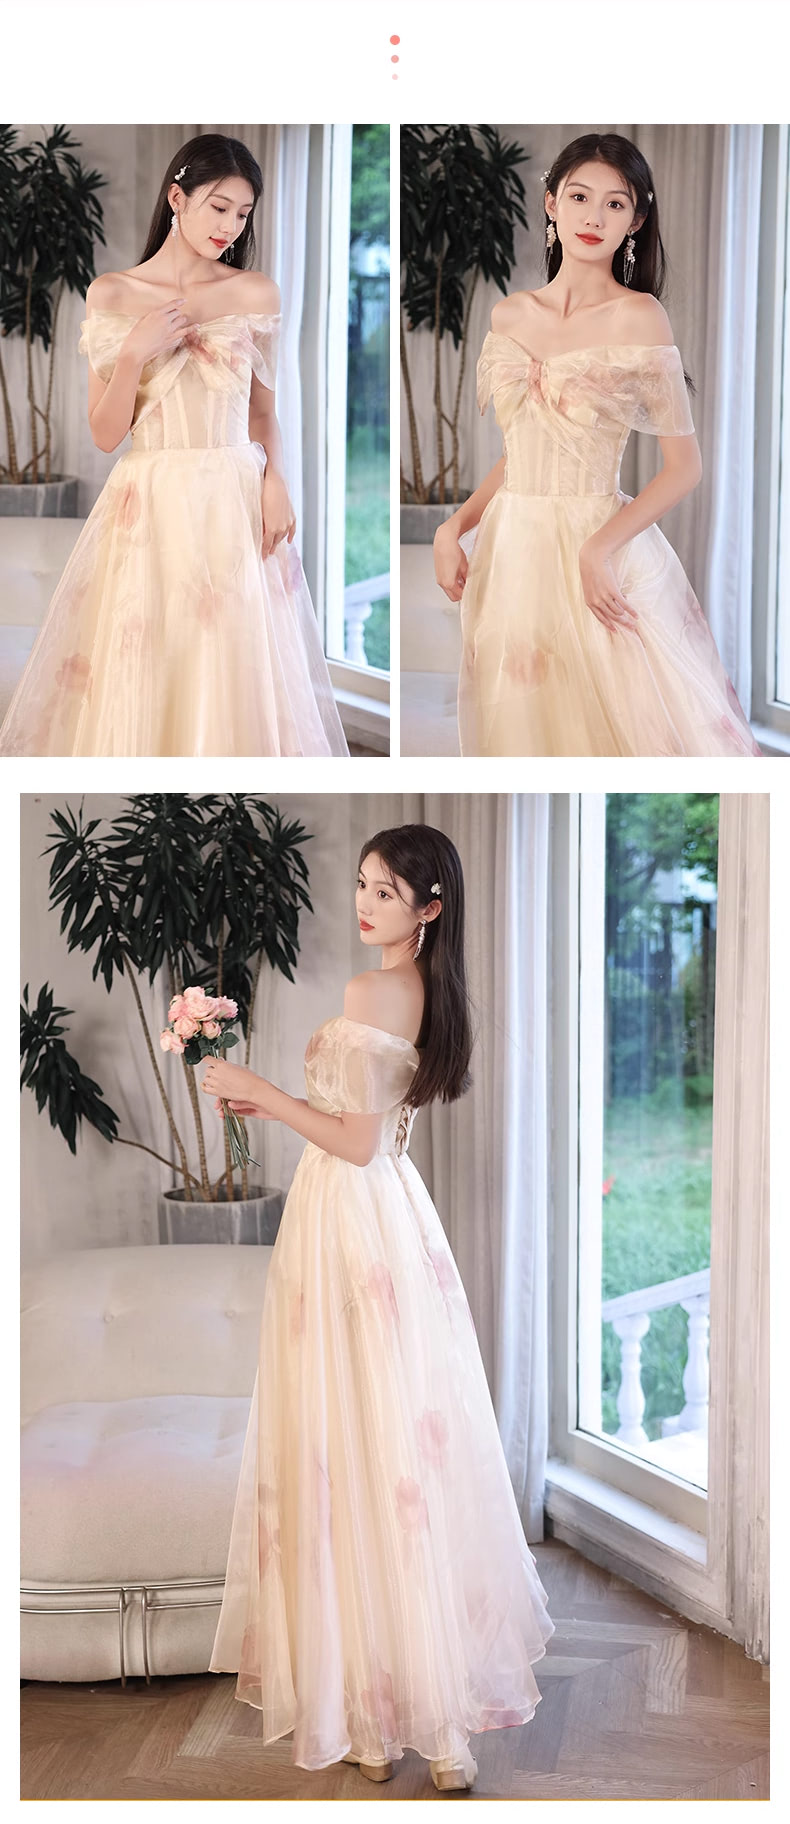 Charming-Tulle-Bridesmaid-Dress-Sweet-Wedding-Party-Evening-Gown17